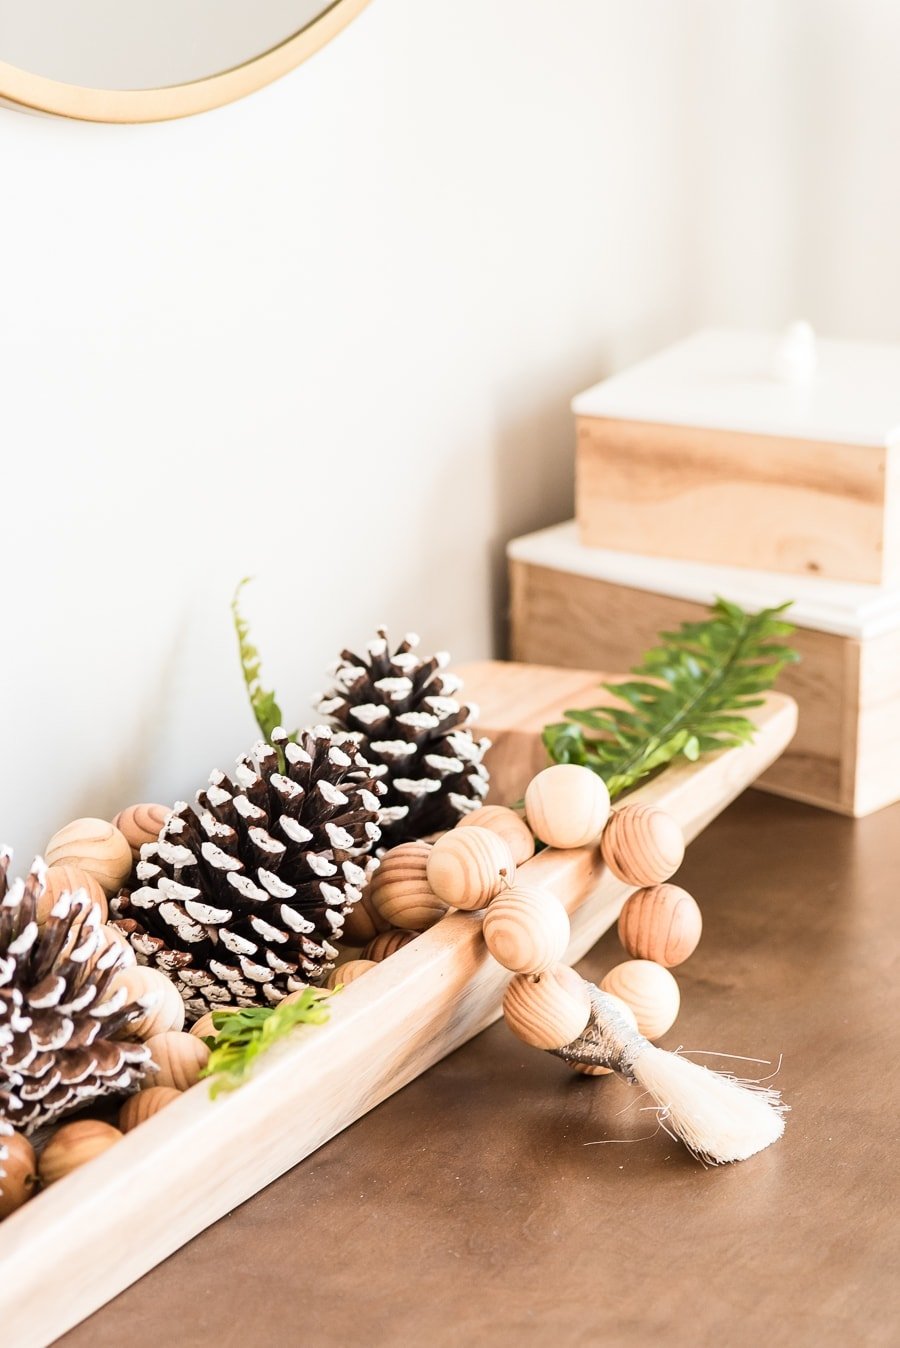 How to Transition From Christmas To Winter Decor